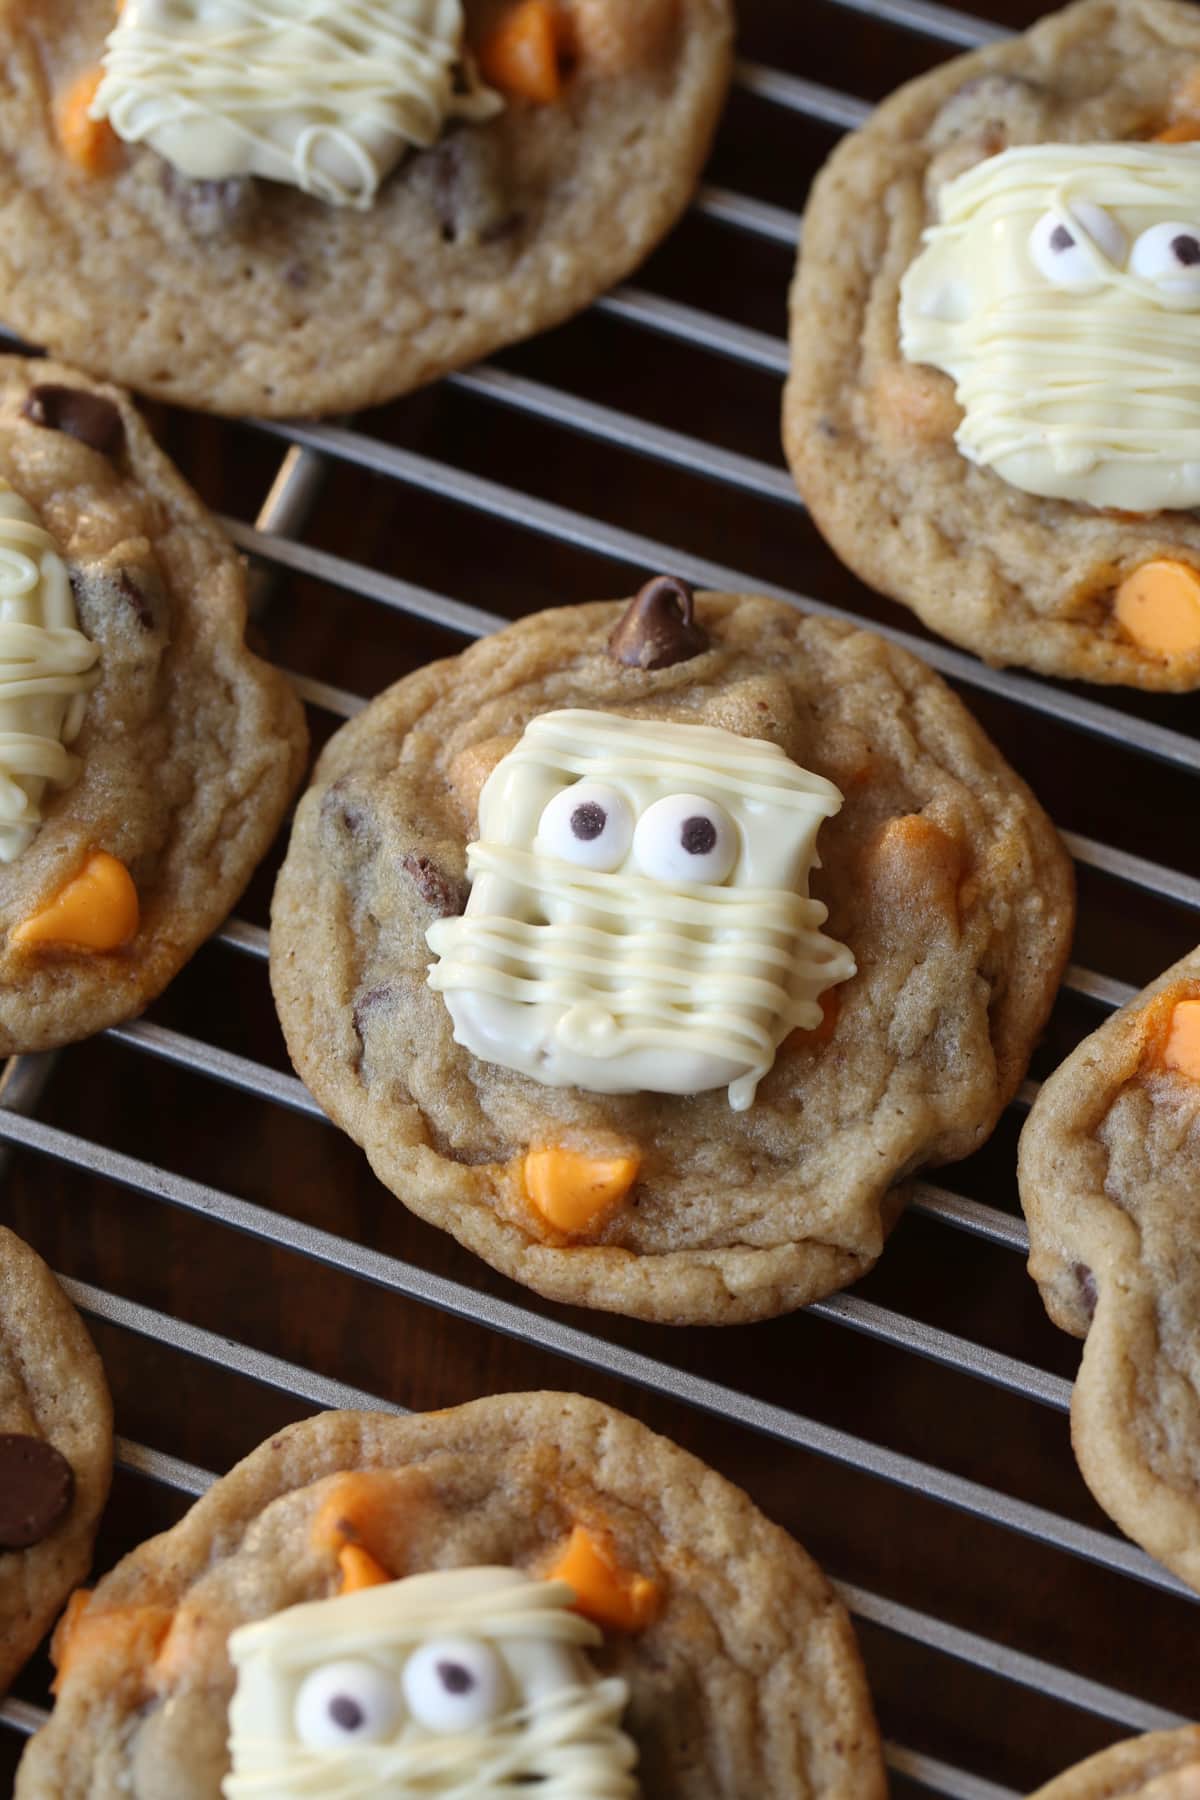 A white chocolate covered pretzel decorated like a mummy on top of a chocolate chip cookie